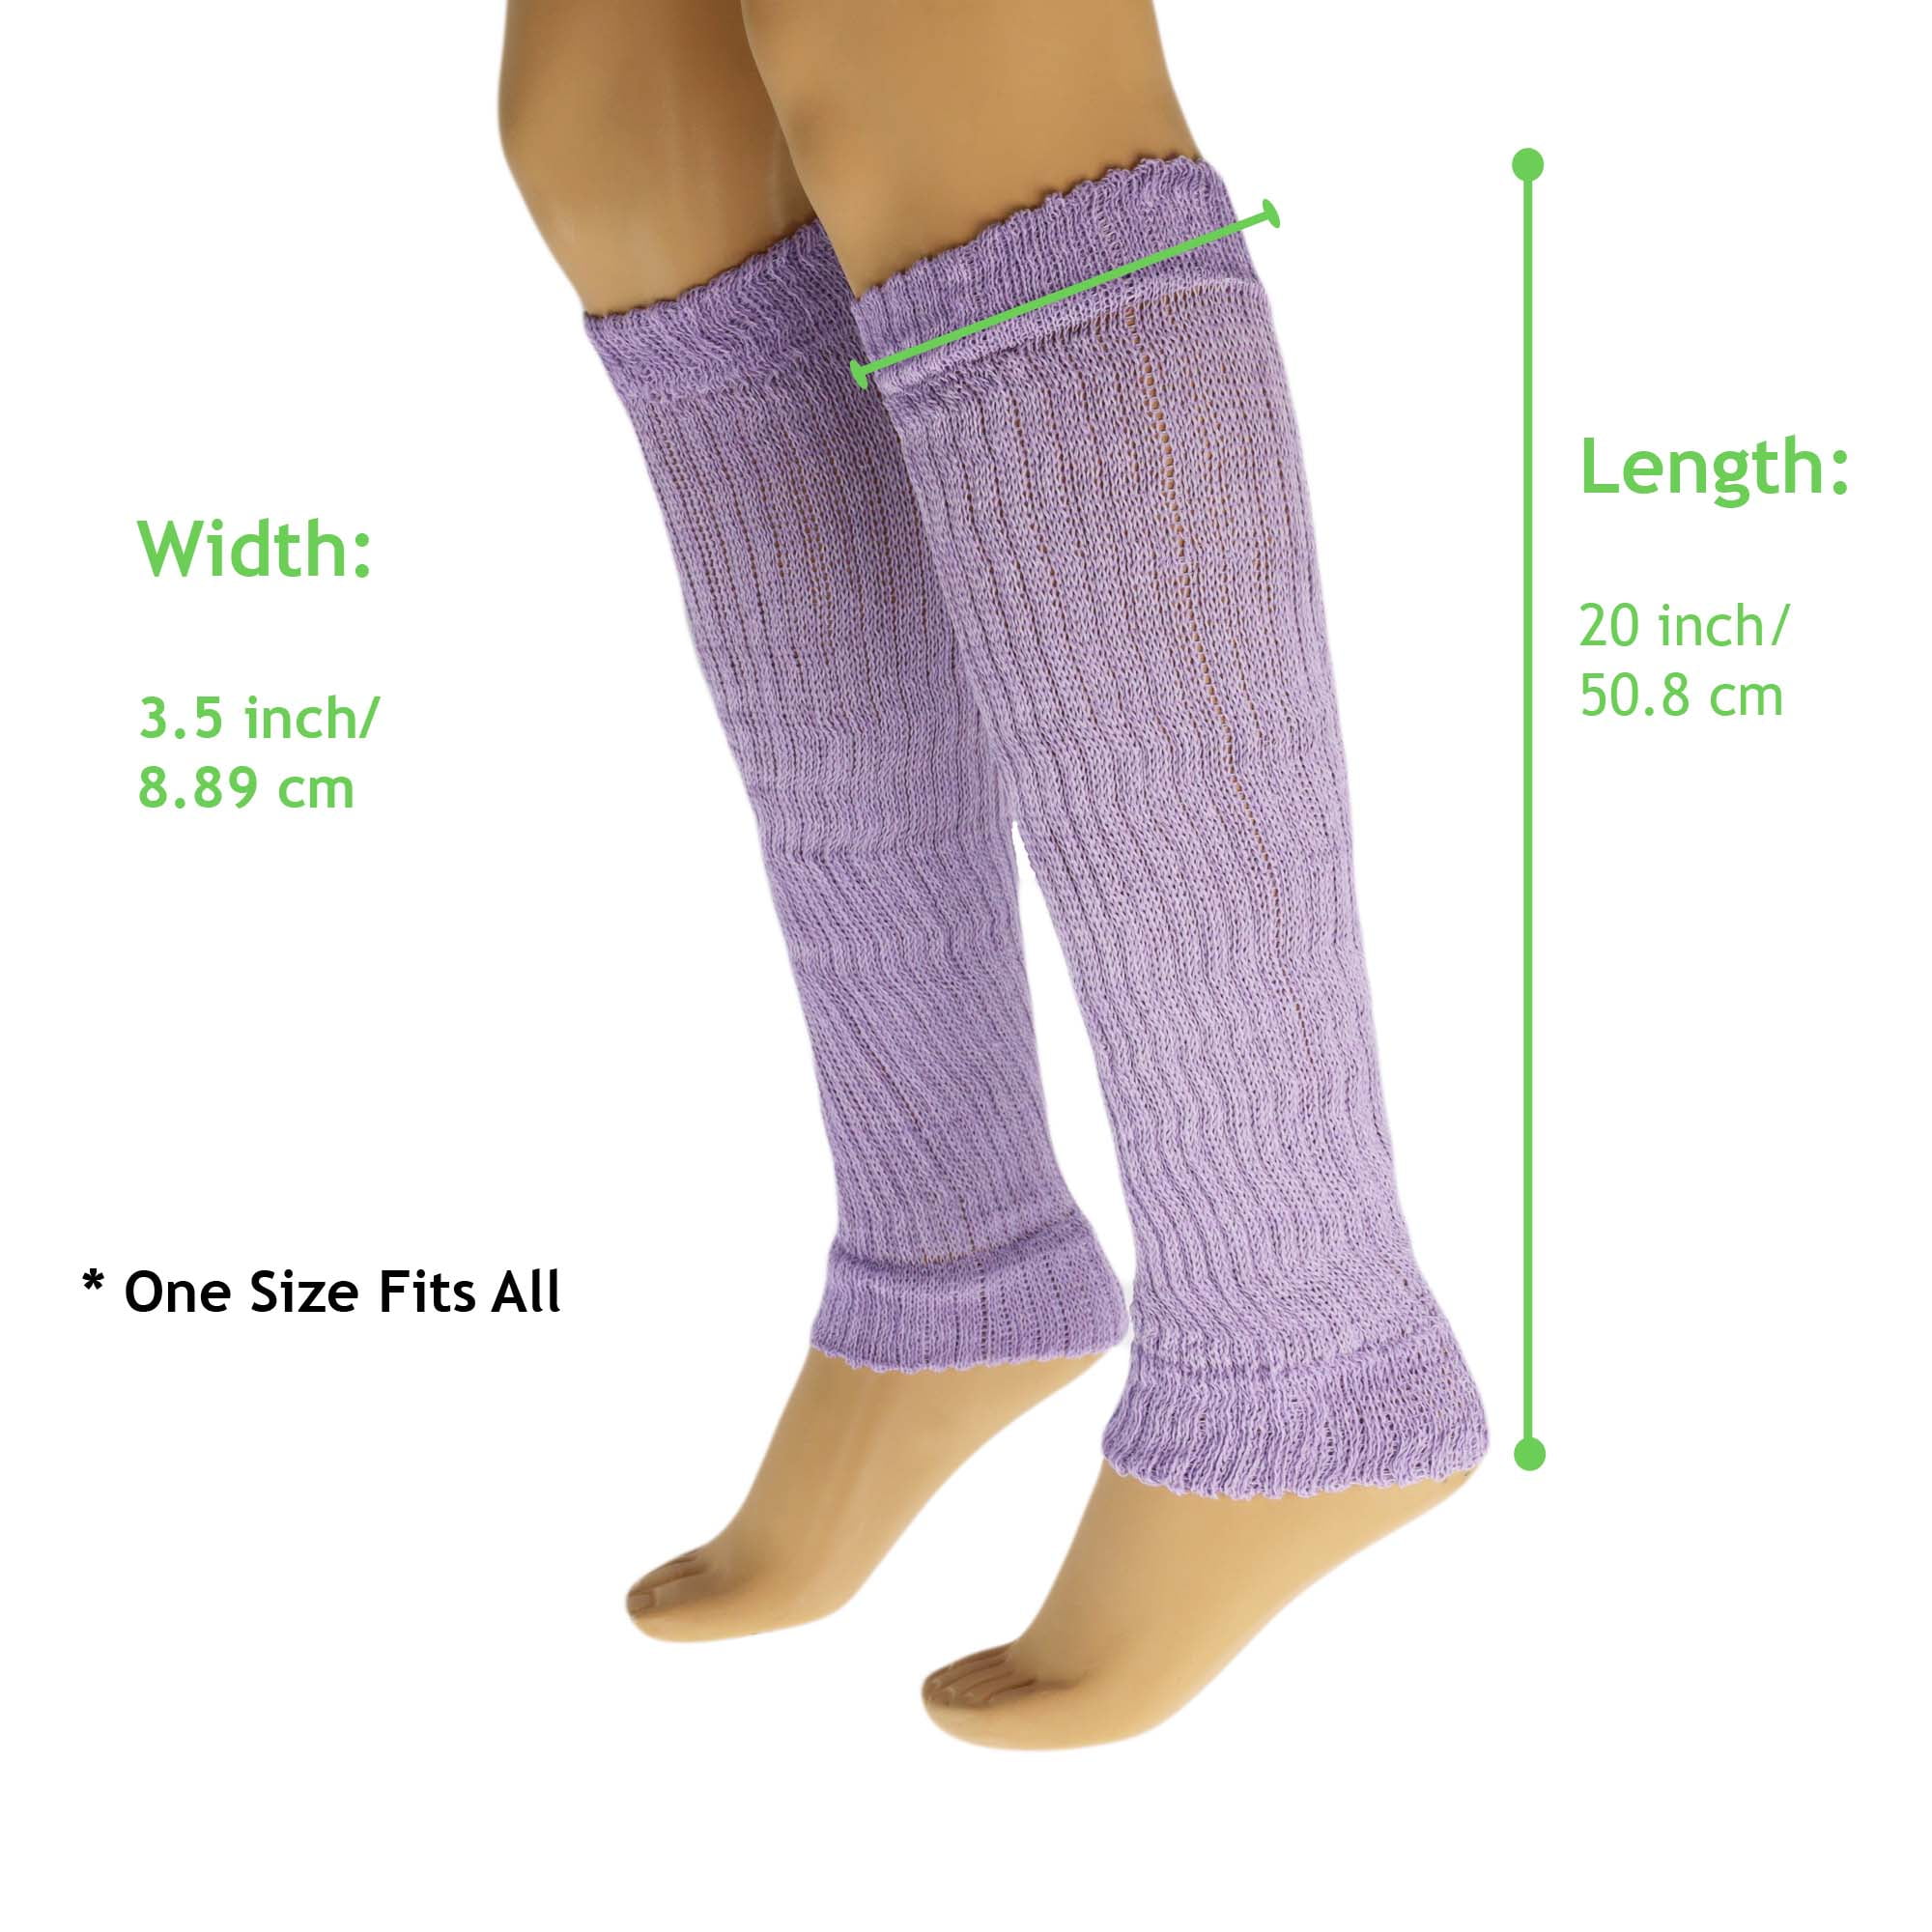 Cotton Leg Warmers for Women Black 1 Pair Knitted Retro 